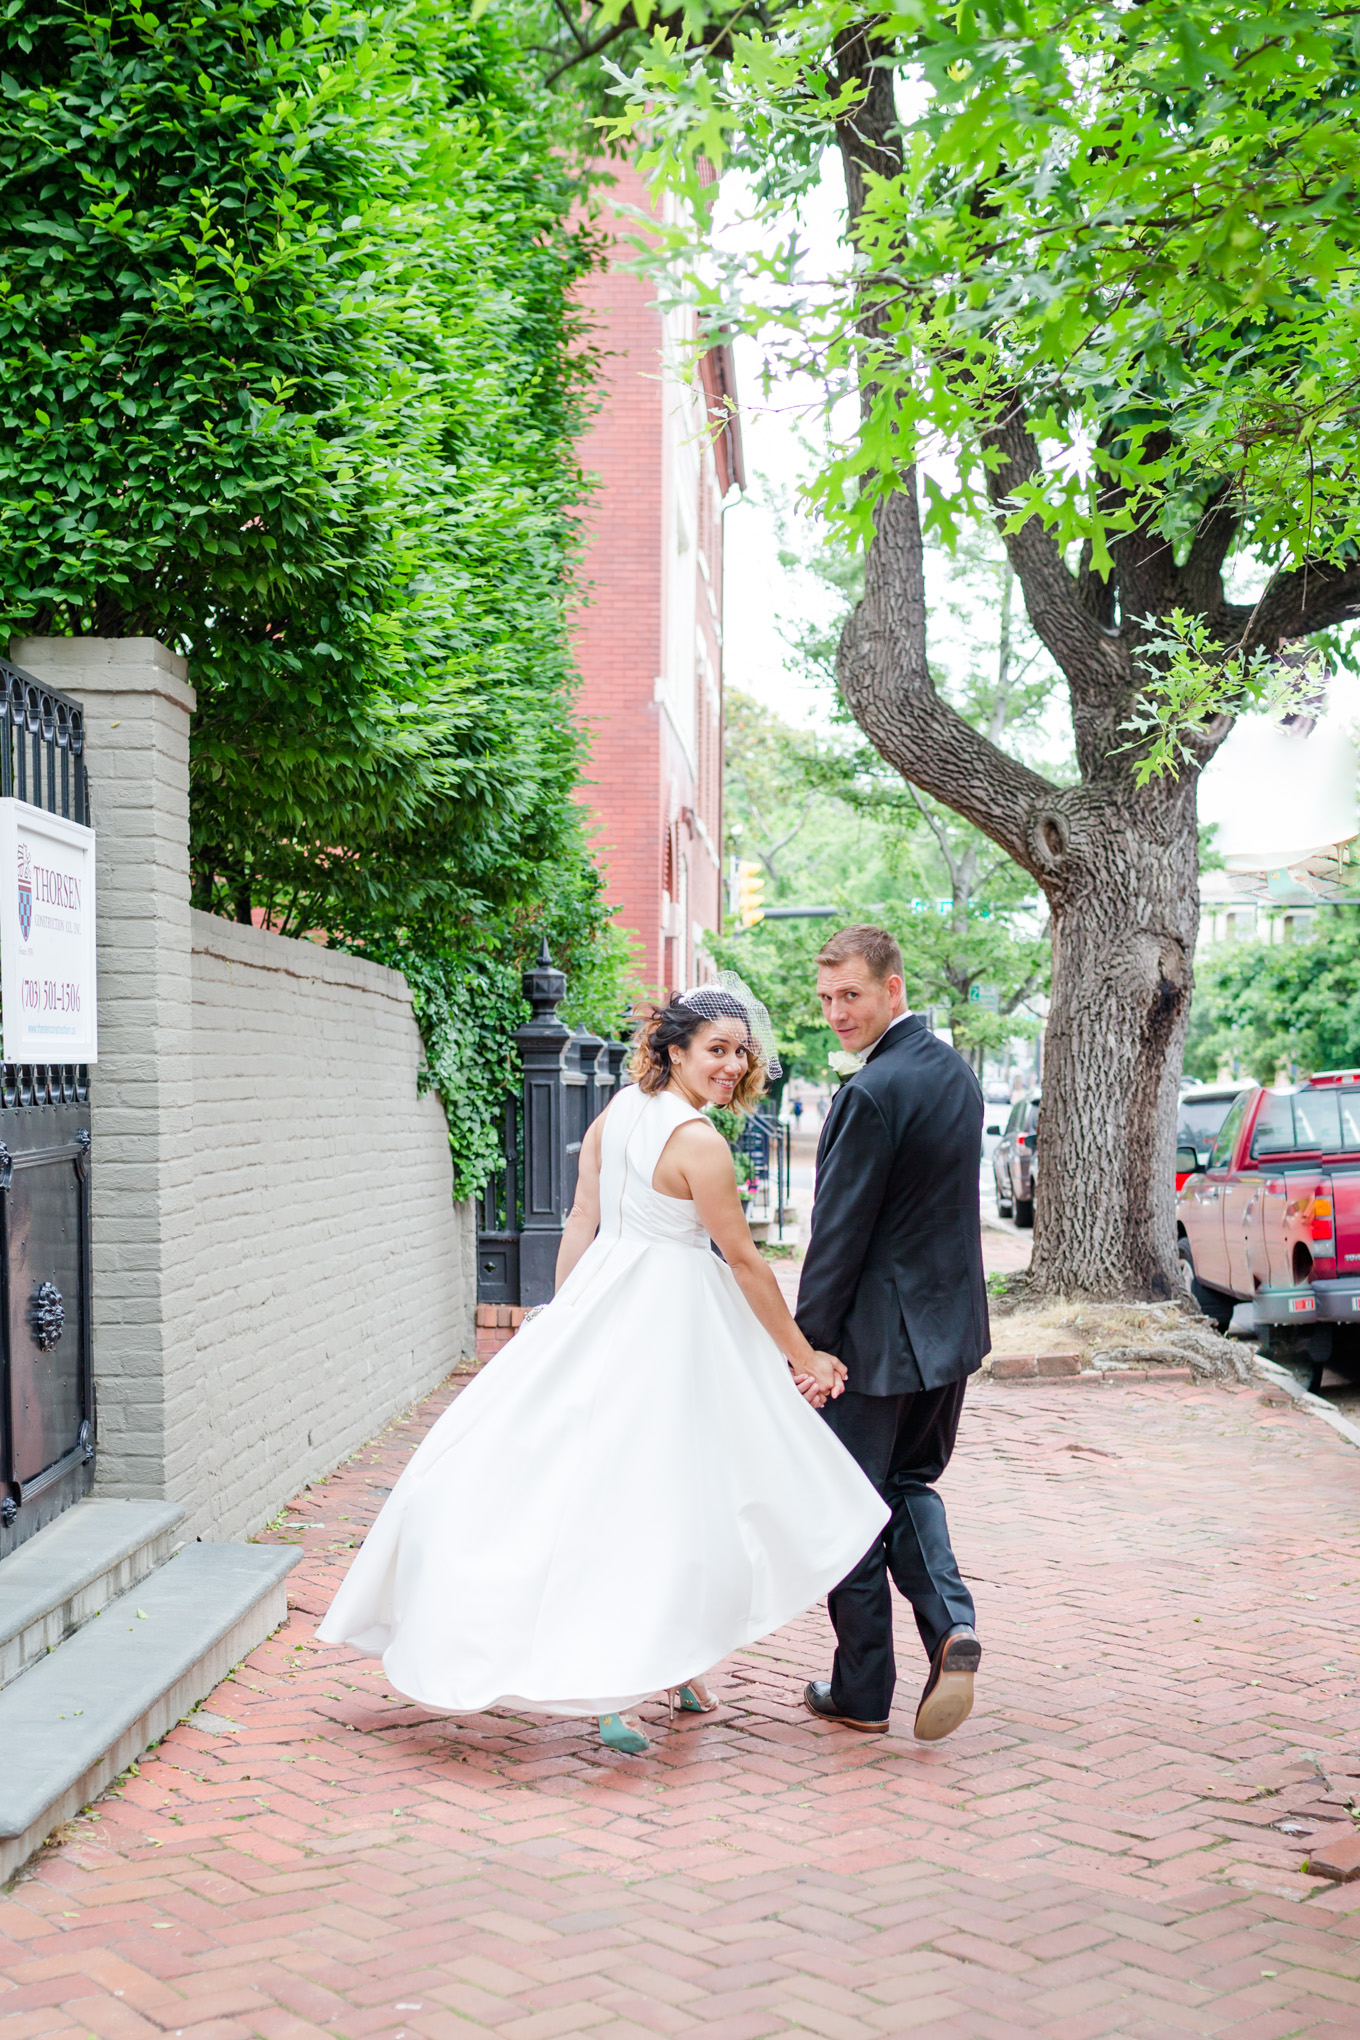 photography ready wedding venues, bride and groom, wedding portraits, portrait locations, old town Alexandria, northern VA wedding venues, Morrison House, Morrison House wedding, walking pic, a-line wedding gown